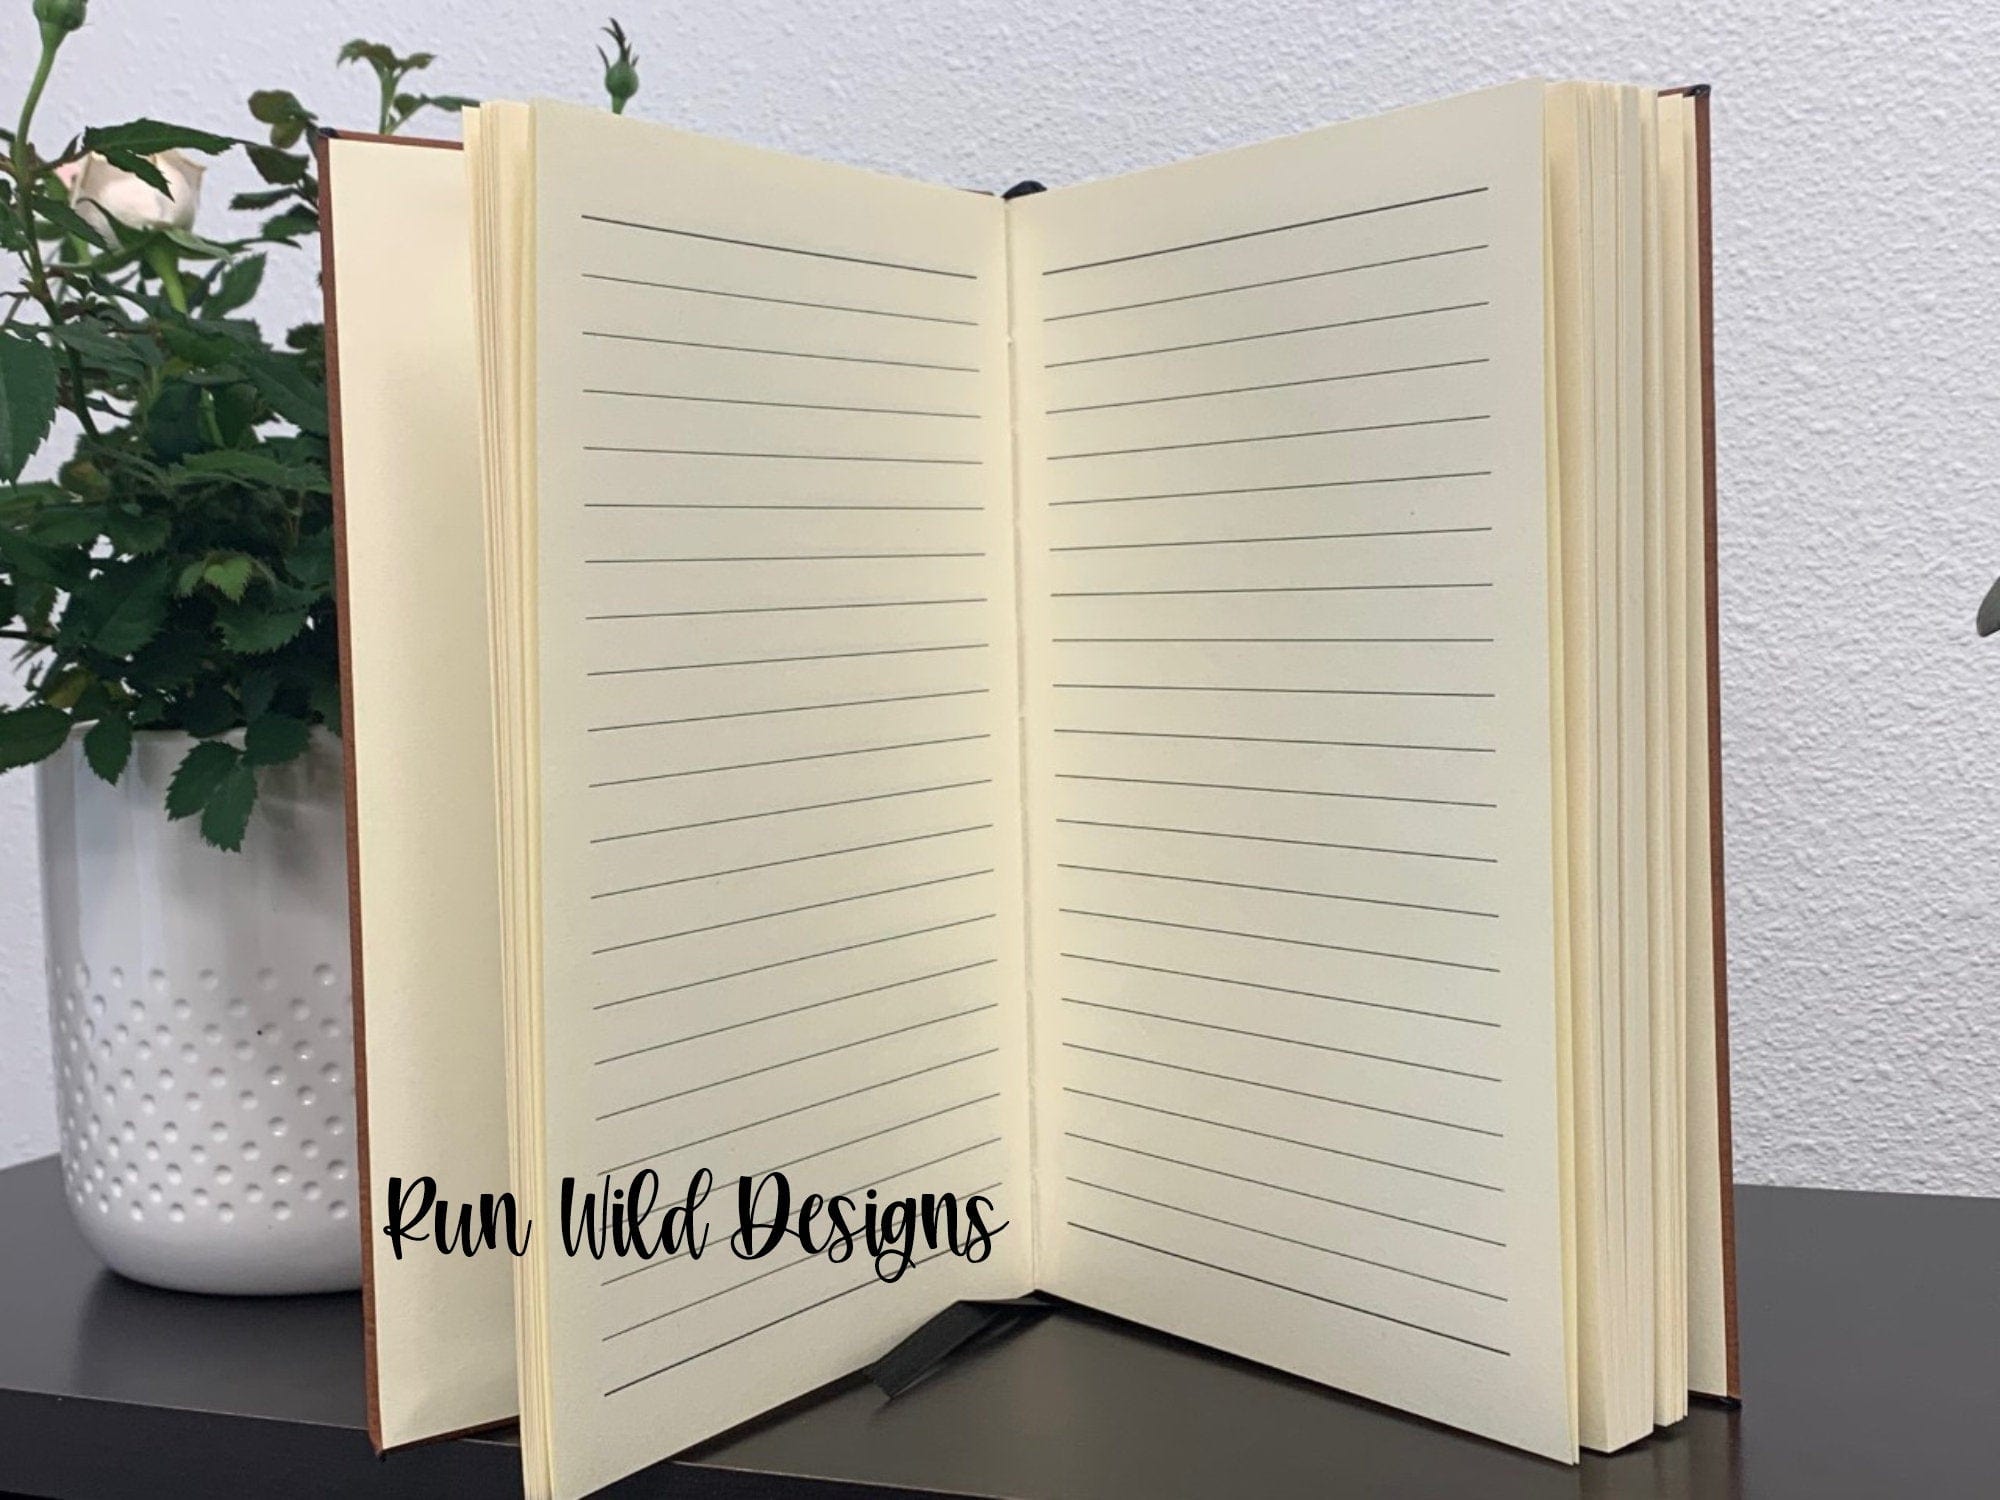 Leatherette journal Leatherette Journal Name Personalized Leatherette Floral Engraved Journal